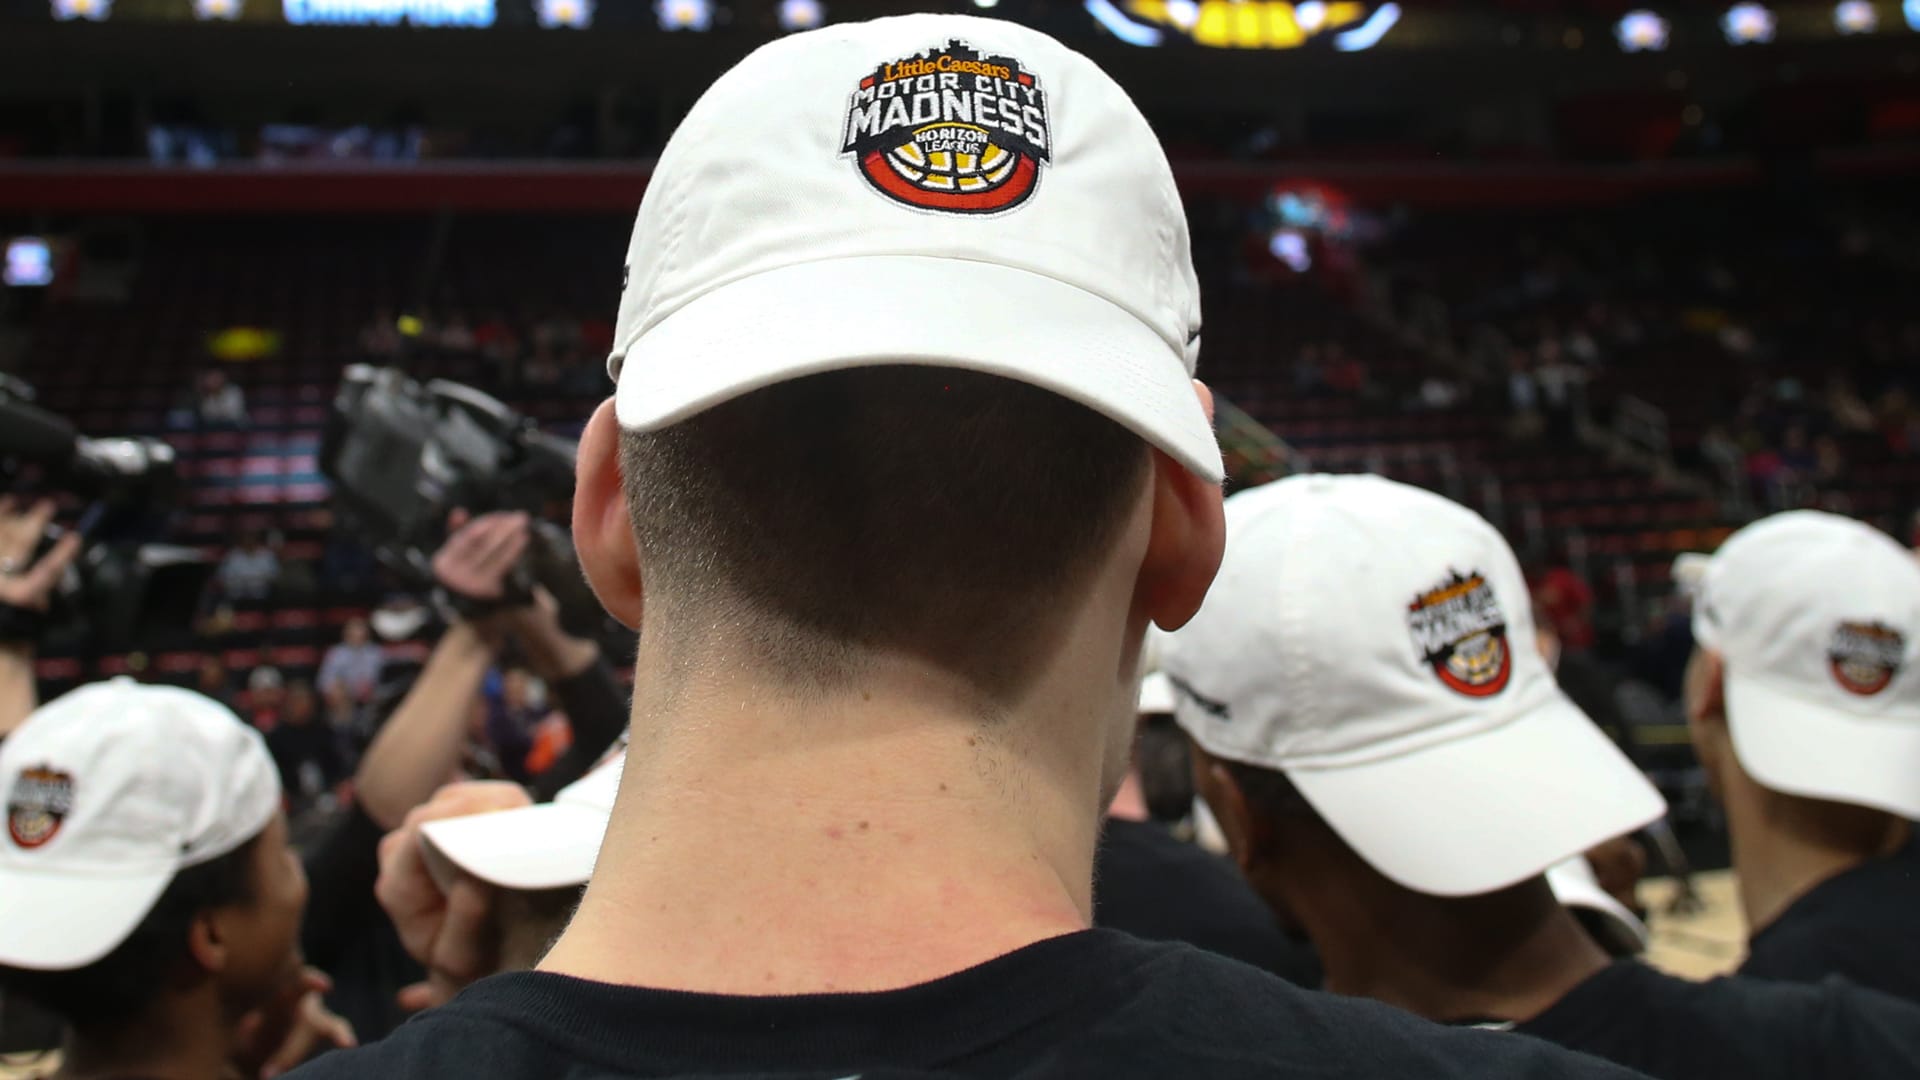 How to watch March Madness Selection Sunday live without cable